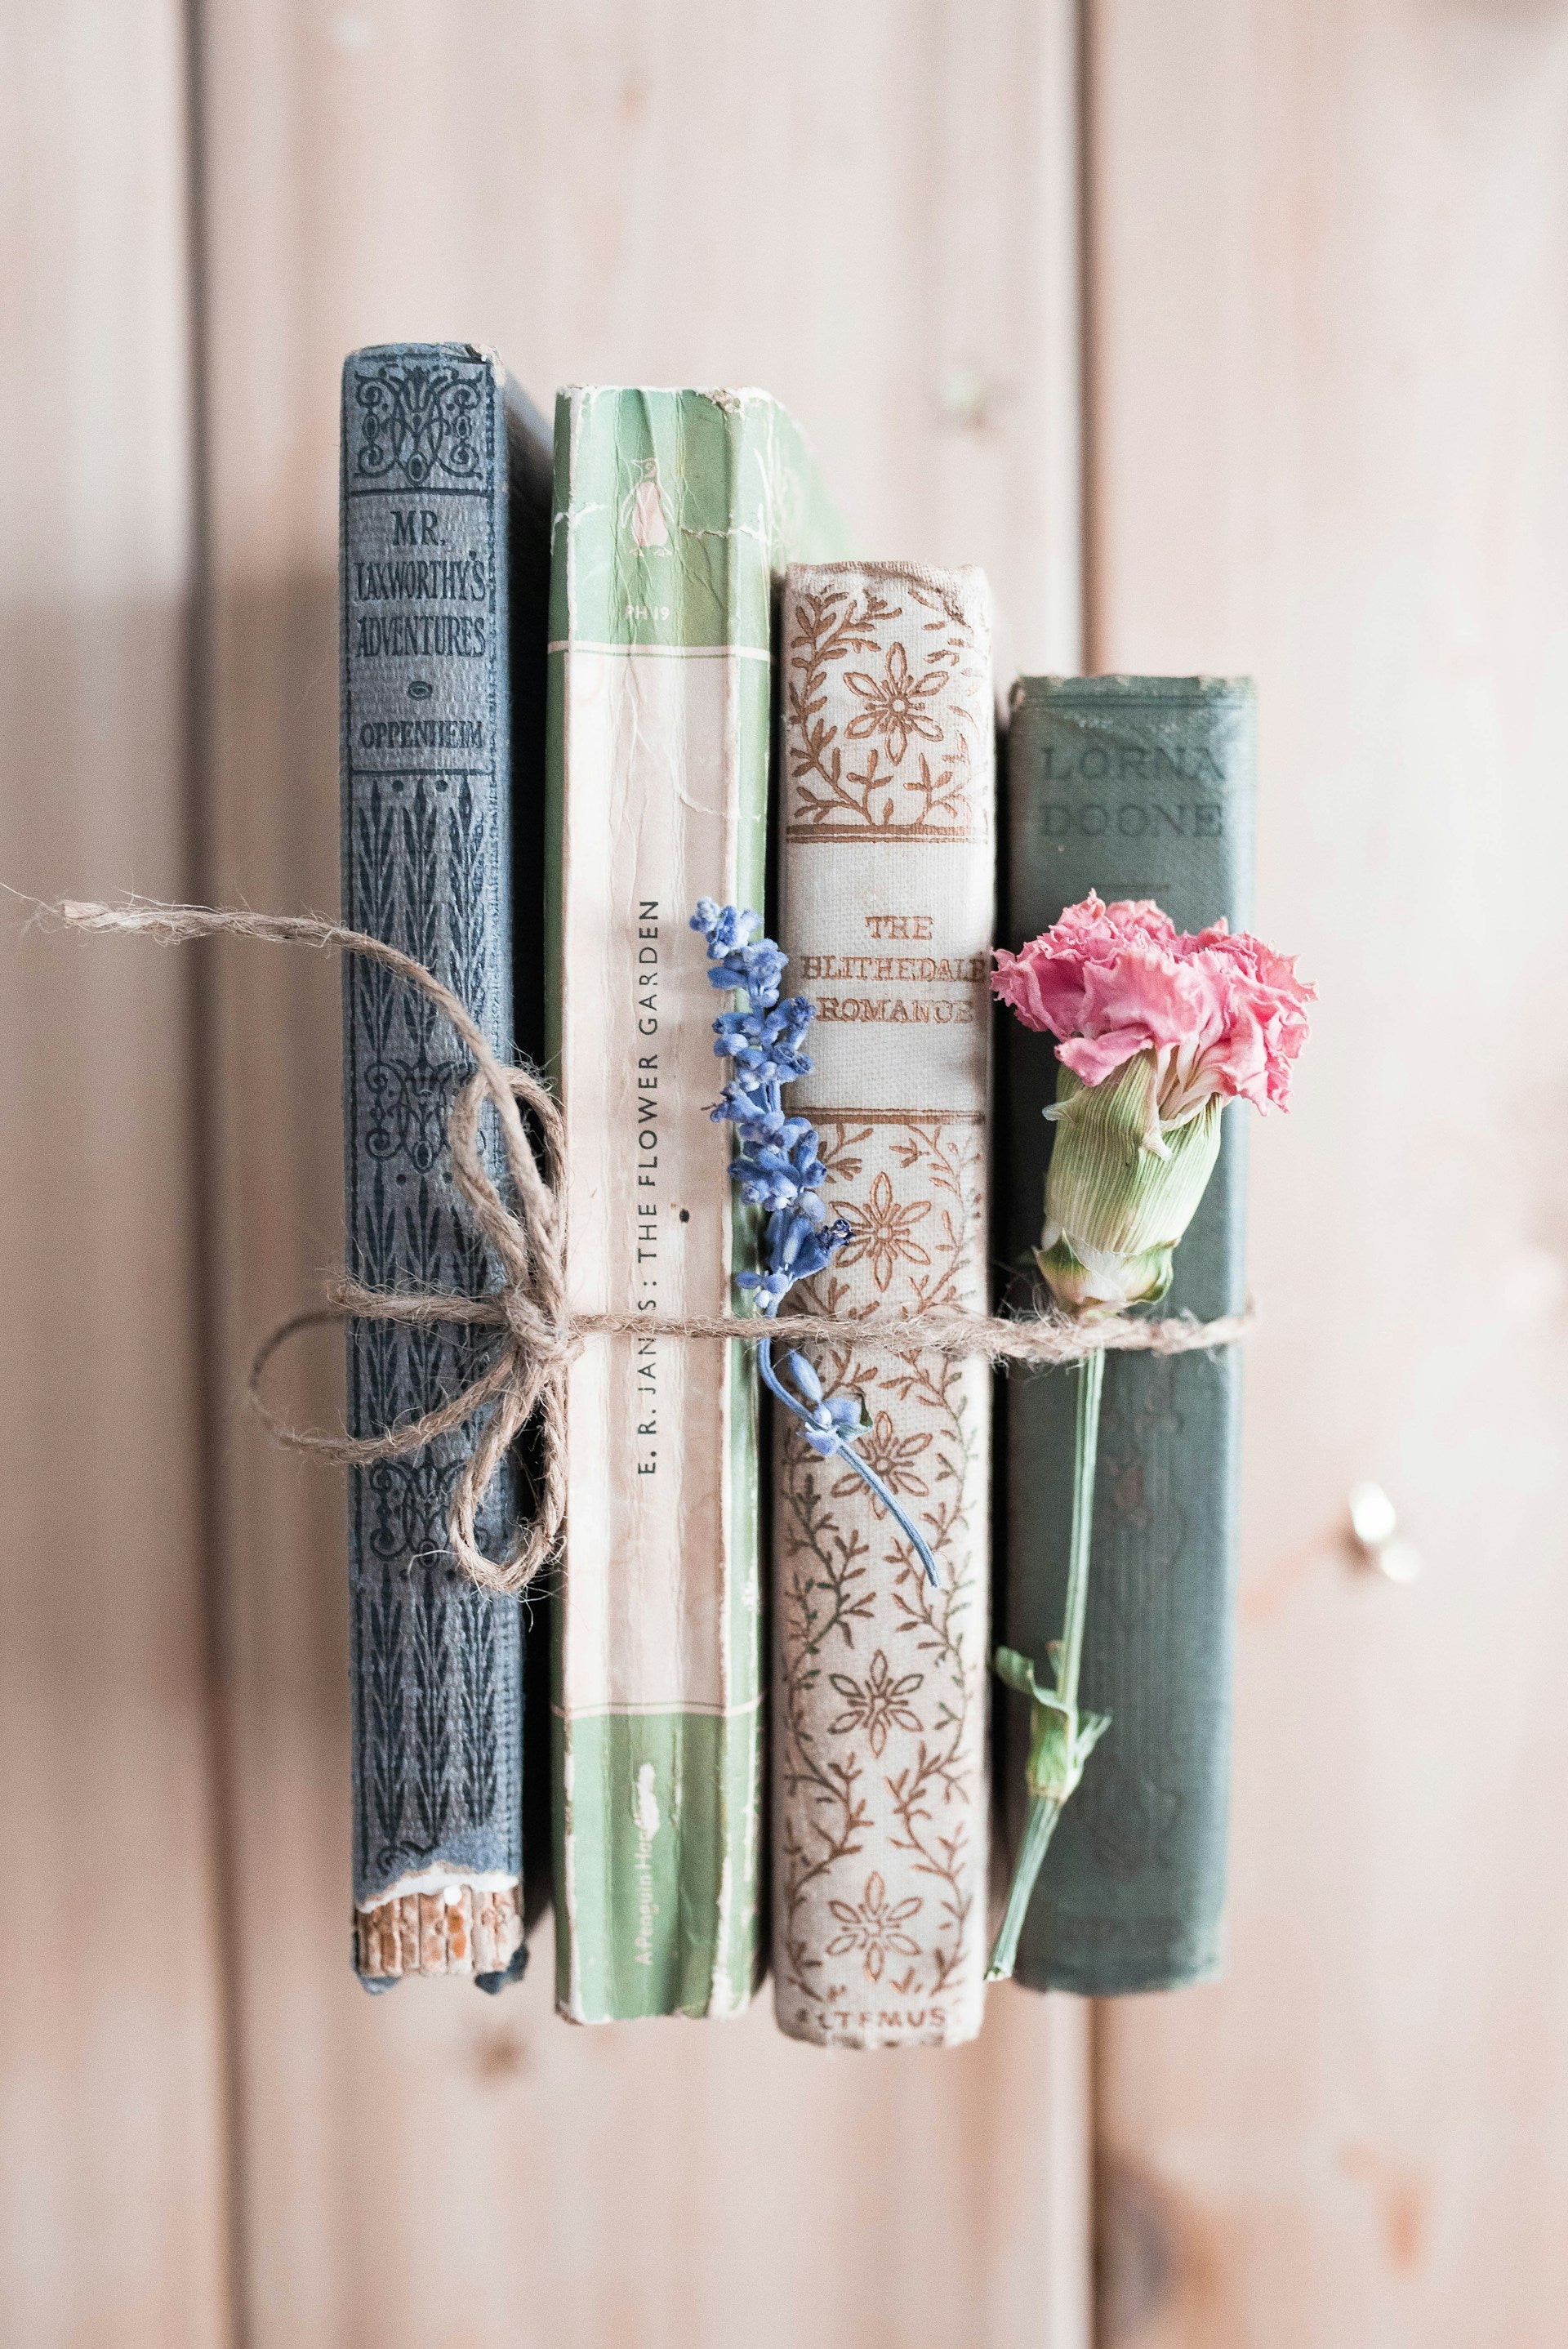 Four books held together by twine, with a flower.